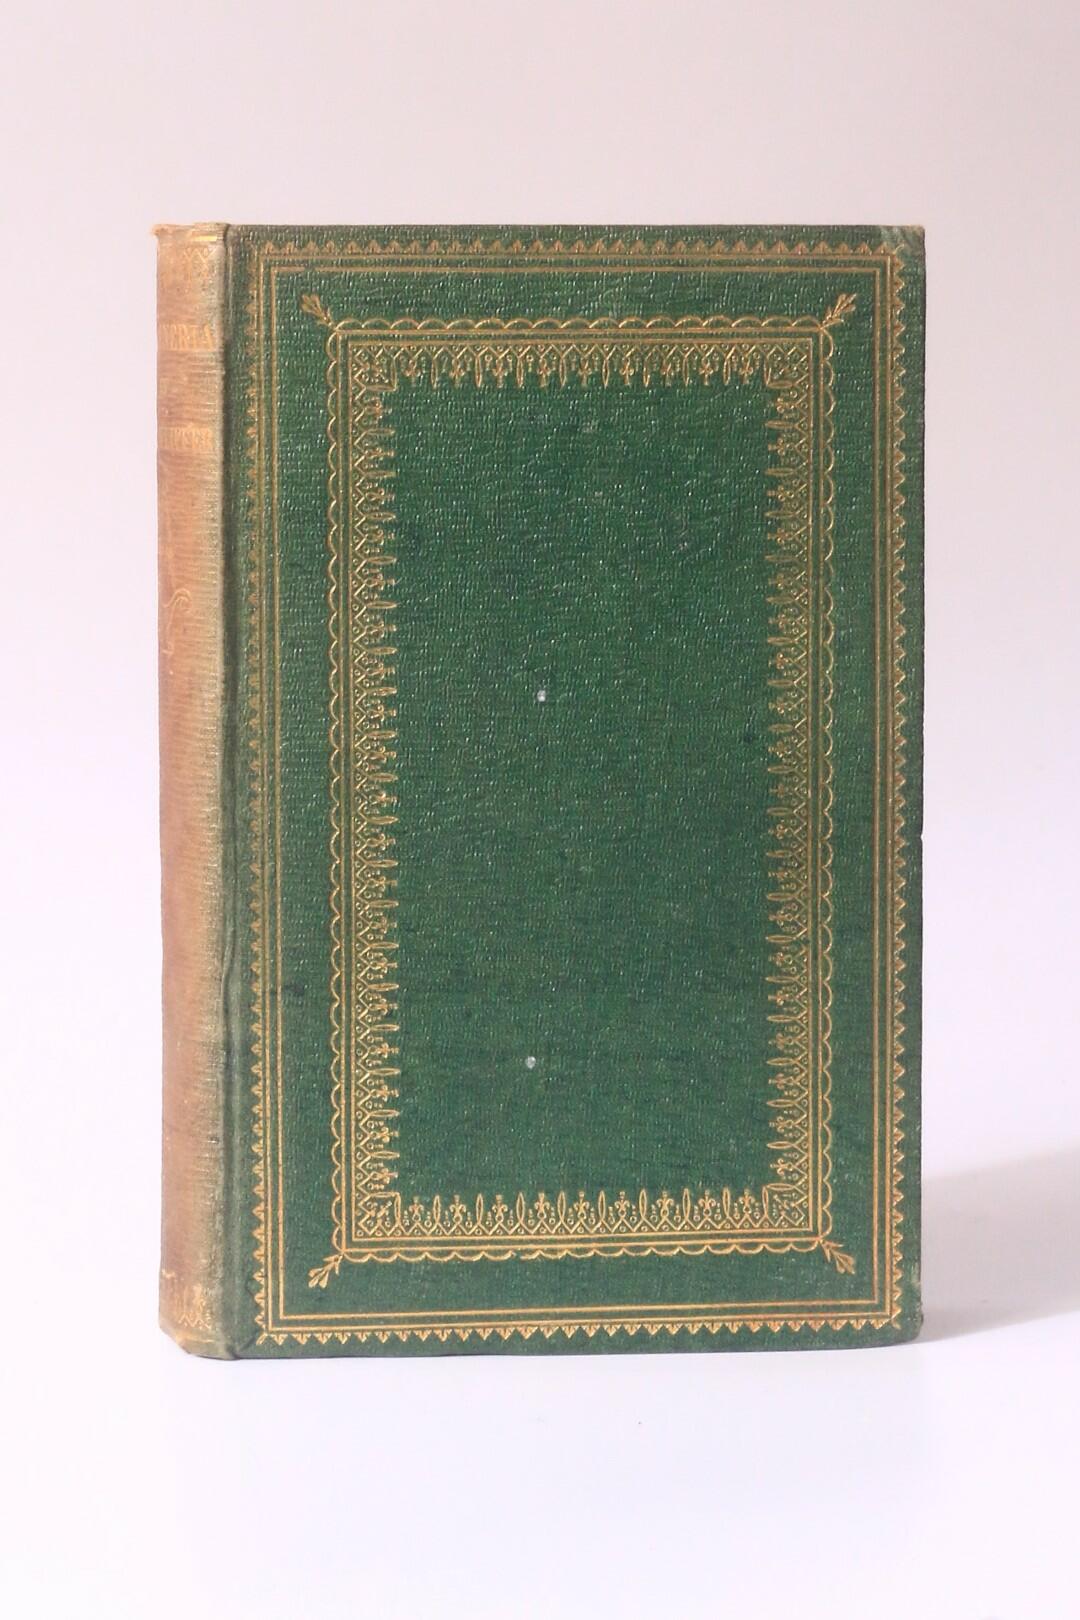 Emily Pfeiffer - Valisneria: or, a Midsummer Day's Dream: A Tale in Prose - Longman, Brown, Green, Longmans & Roberts, 1857, First Edition.